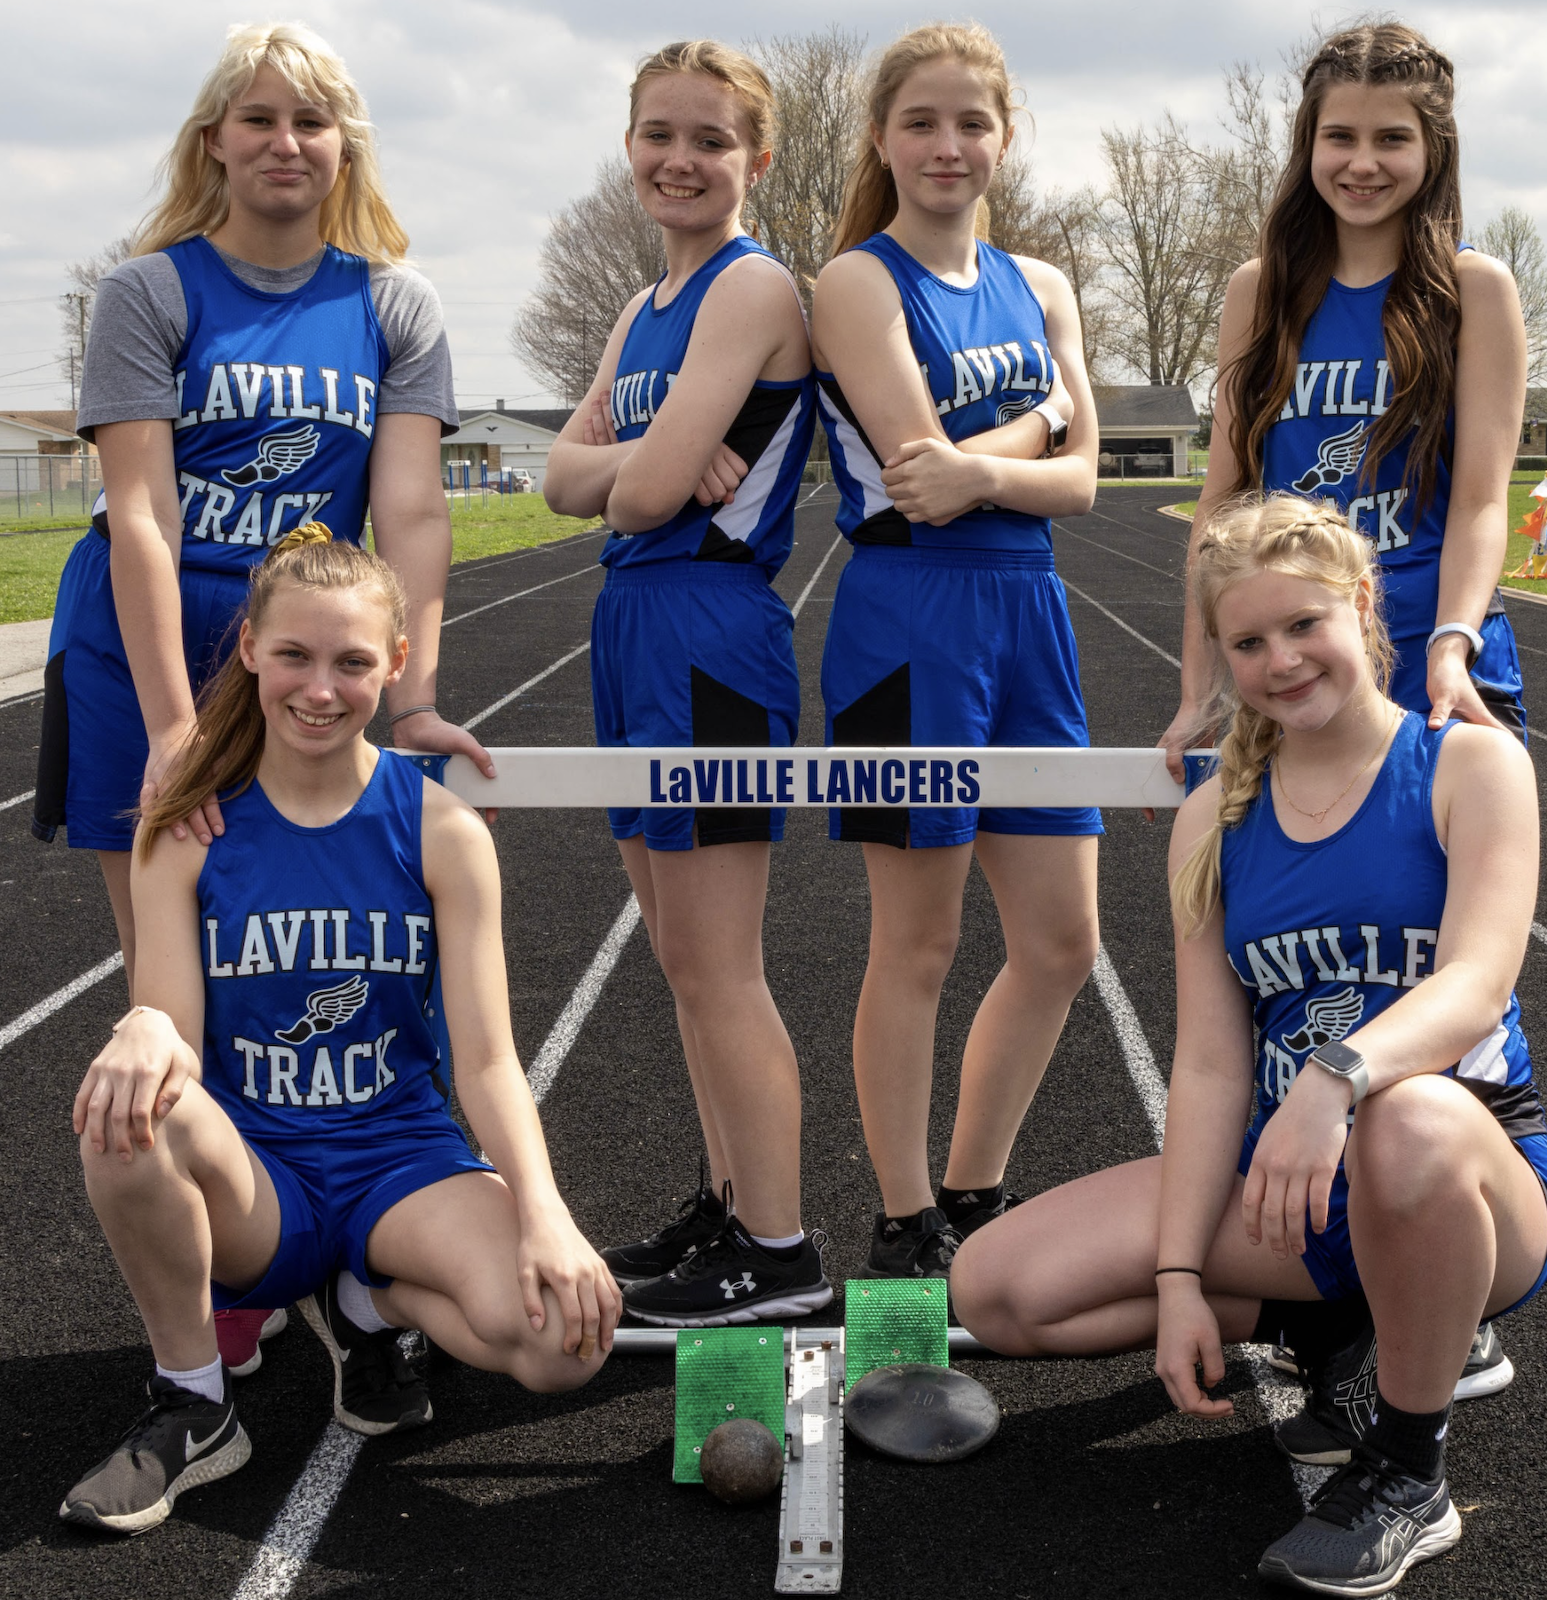 JHGTrk - 2-22 Jr. High Girls Track Team Picture.png